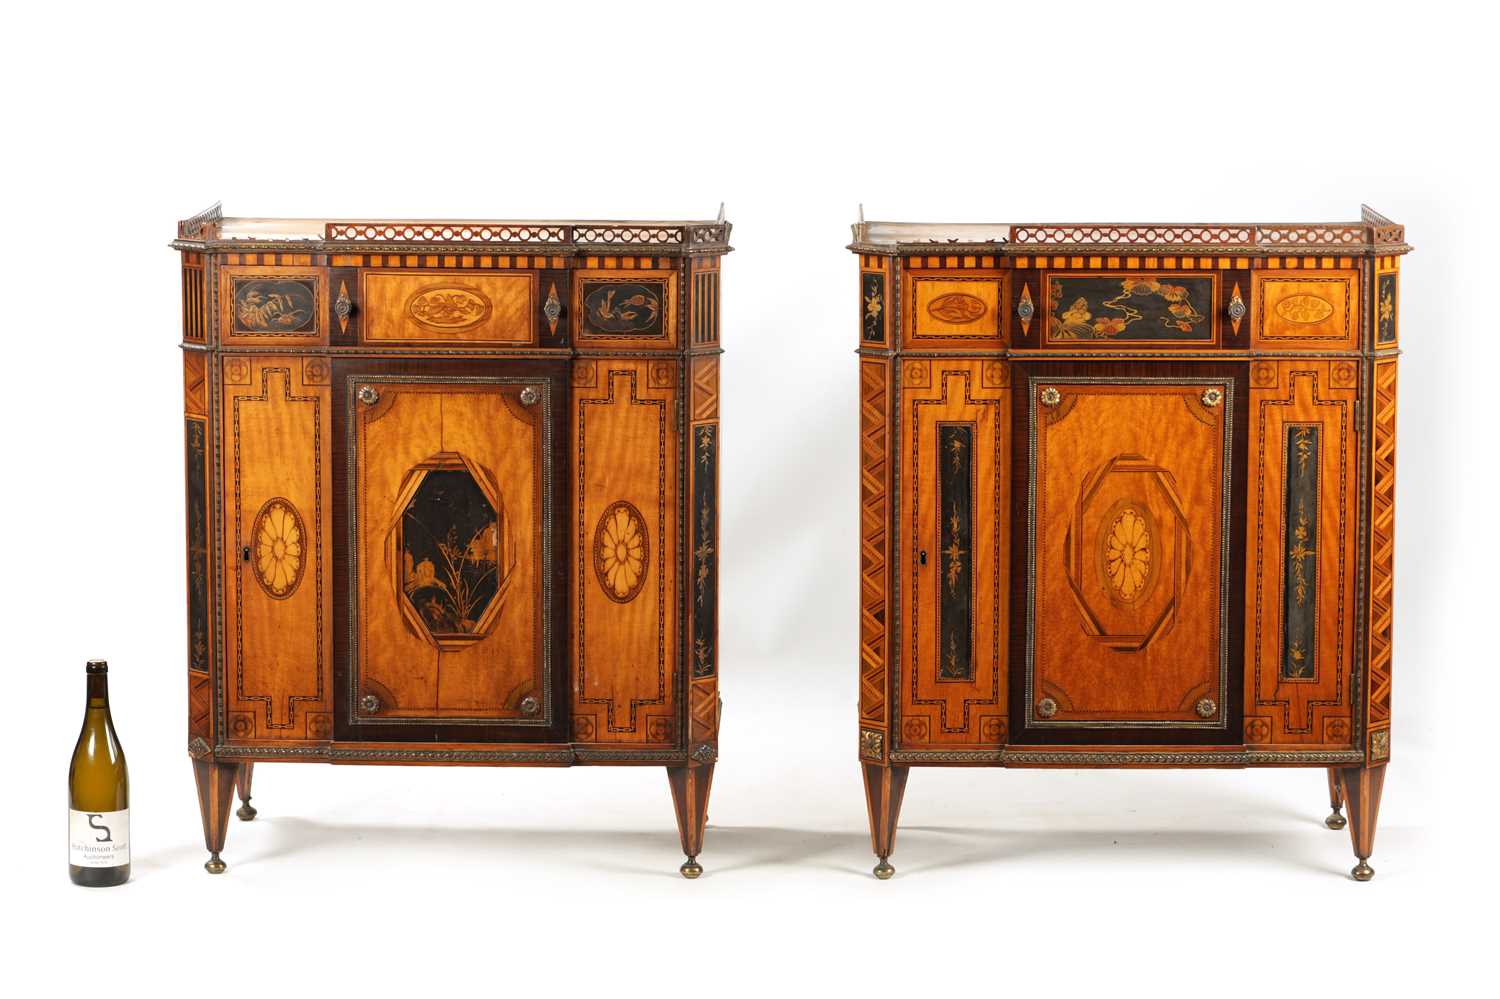 A FINE PAIR OF 18TH CENTURY CONTINENTAL SATINWOOD AND MAHOGANY LACQUERWORK AND INLAID SIDE CABINETS - Image 2 of 15